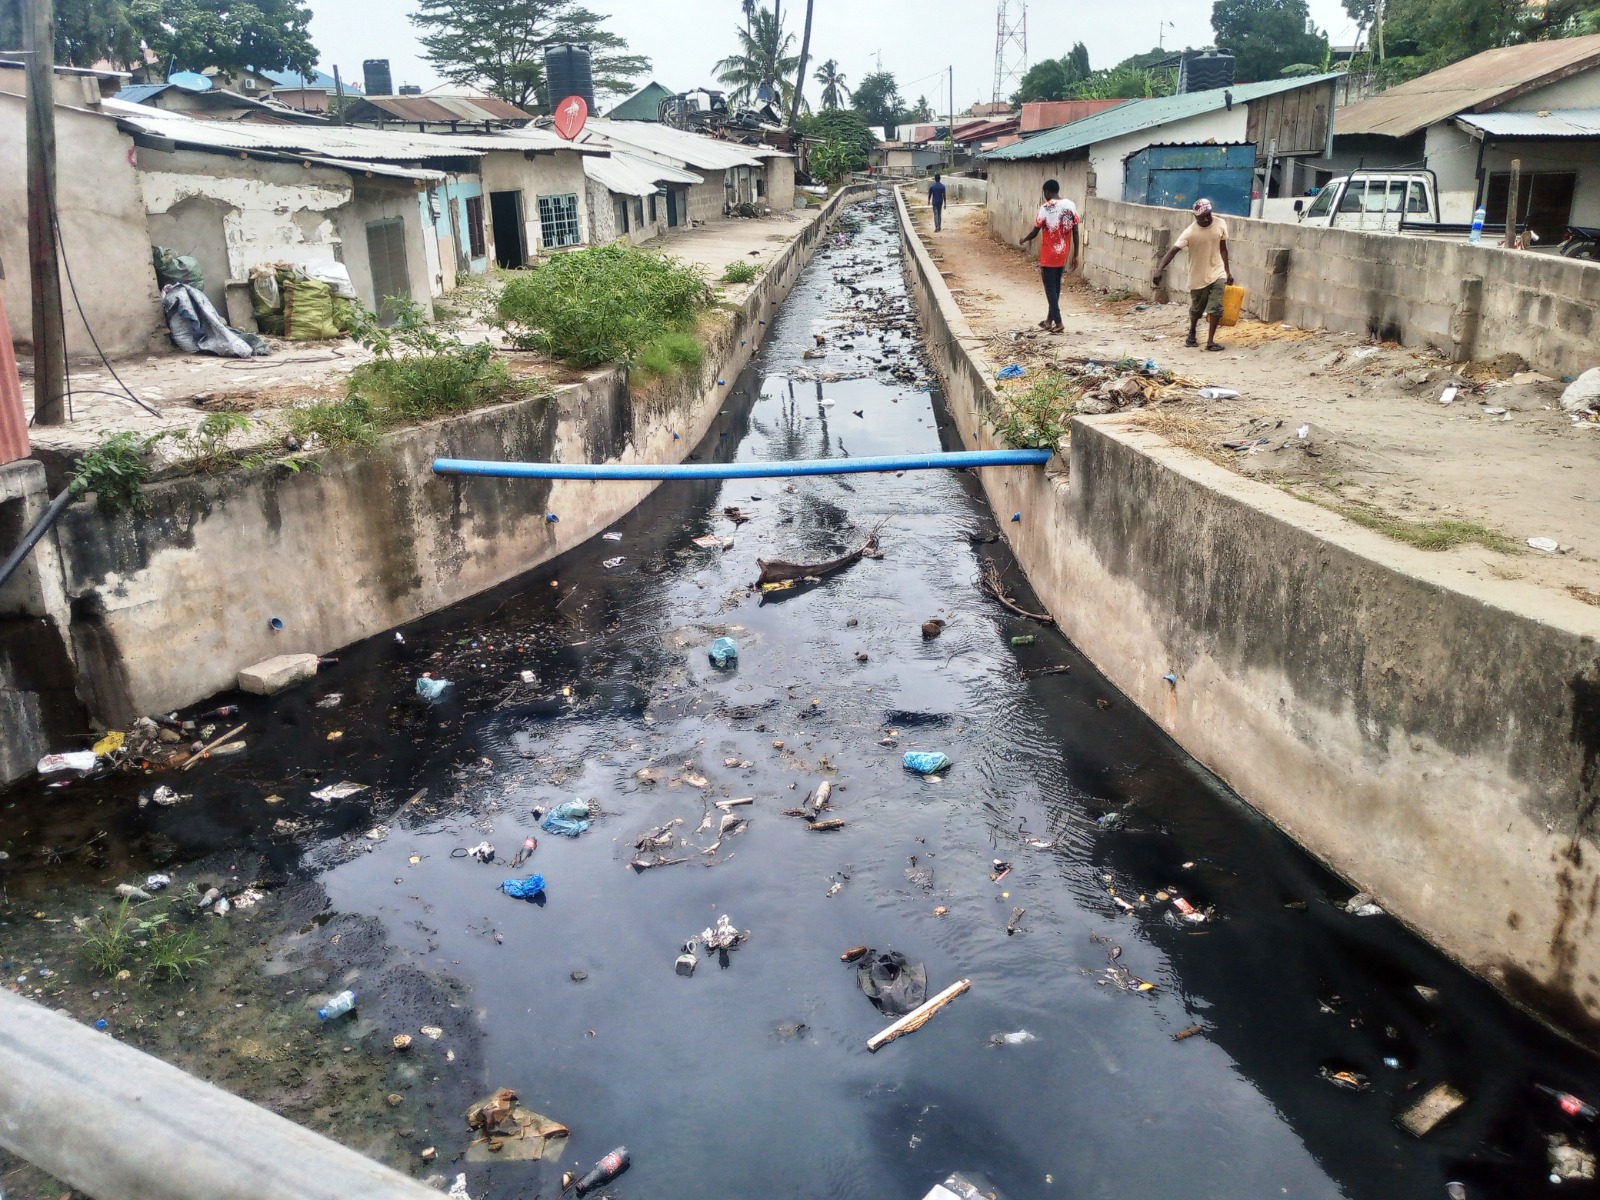 A special rainwater trench in the Uzuri Kilimani Manzese, Ubungo Municipality, Dar es Salaam, filled with dirty water discharged from toilets, posing a serious health risk. This concerning situation was captured by our roving photographer yesterday.